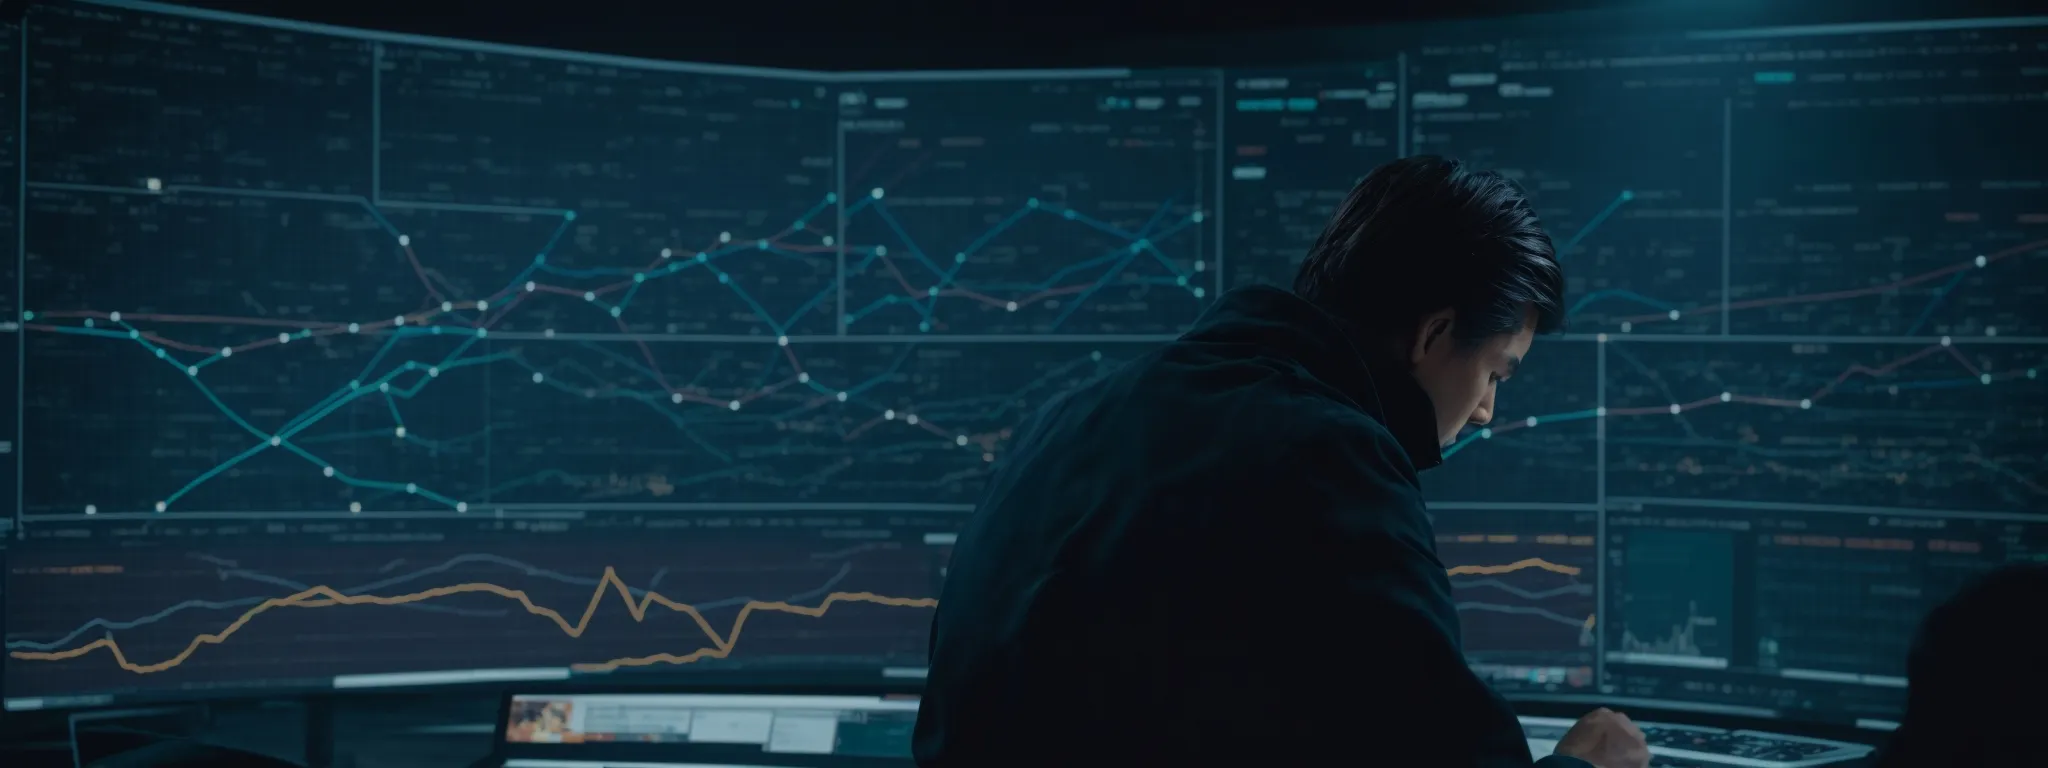 a tactician hunched over a digital analytics dashboard, where pathways and nodes symbolize a web of strategic connections.